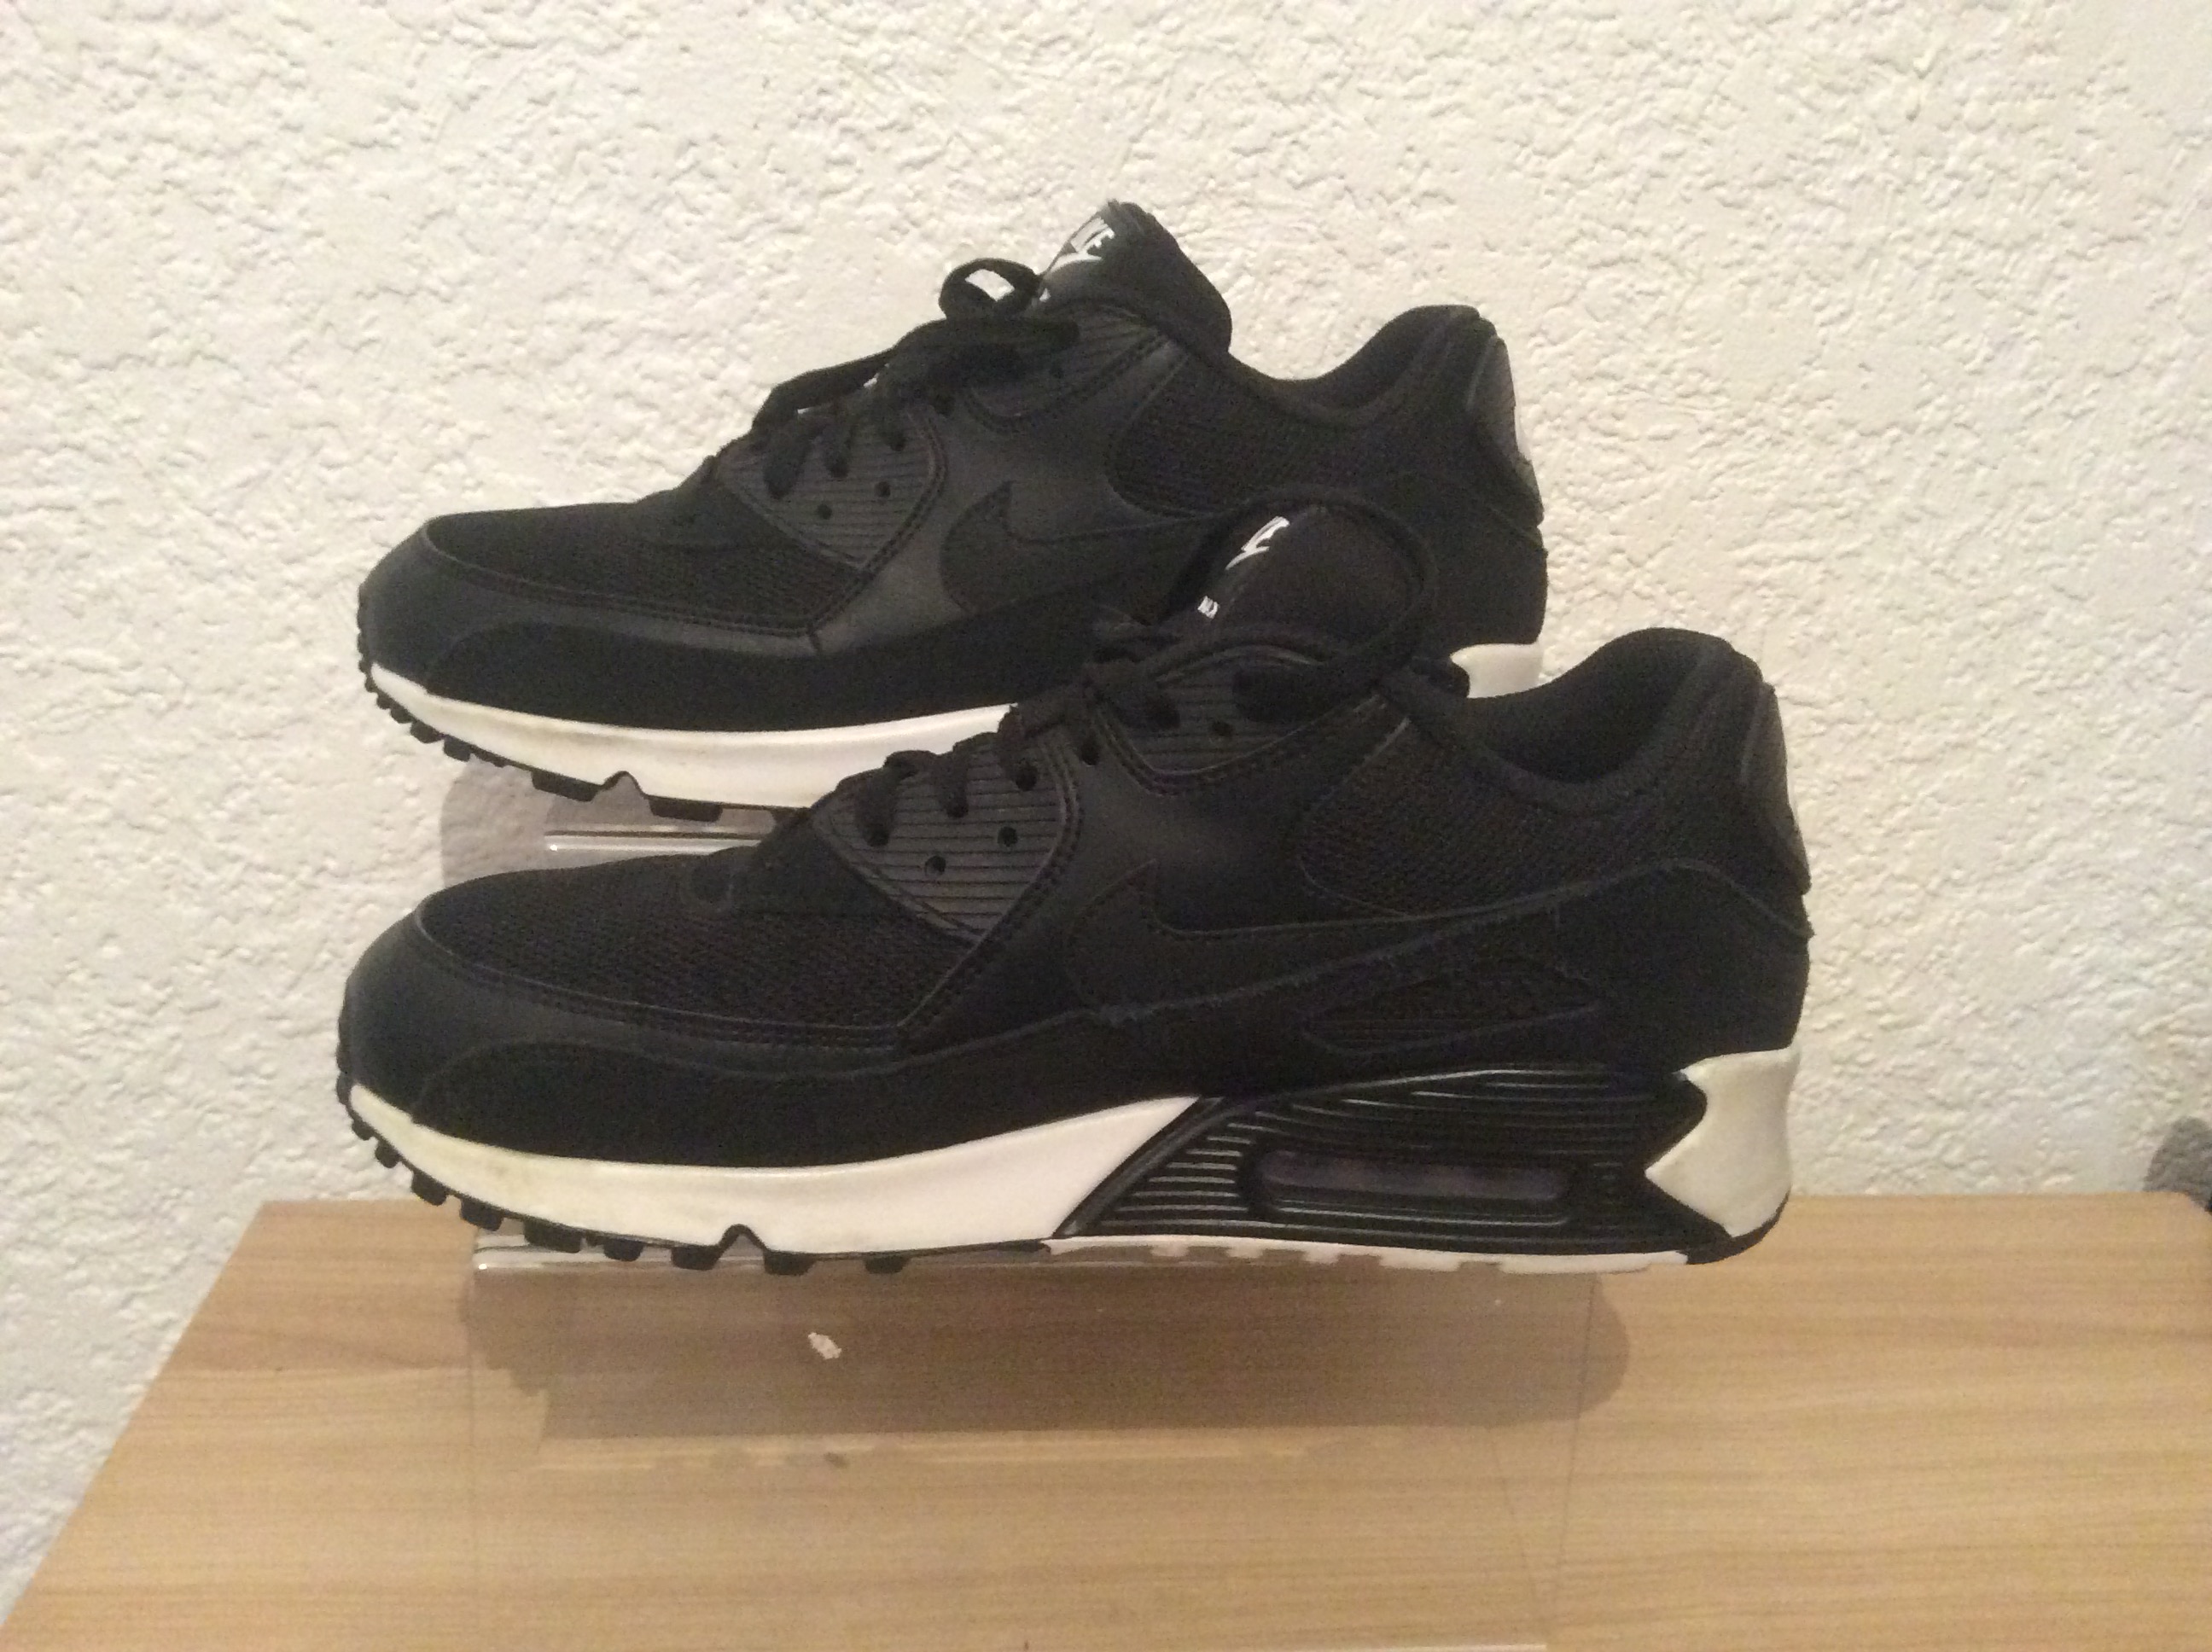 Second Hand Black Air Max 90 Trainers